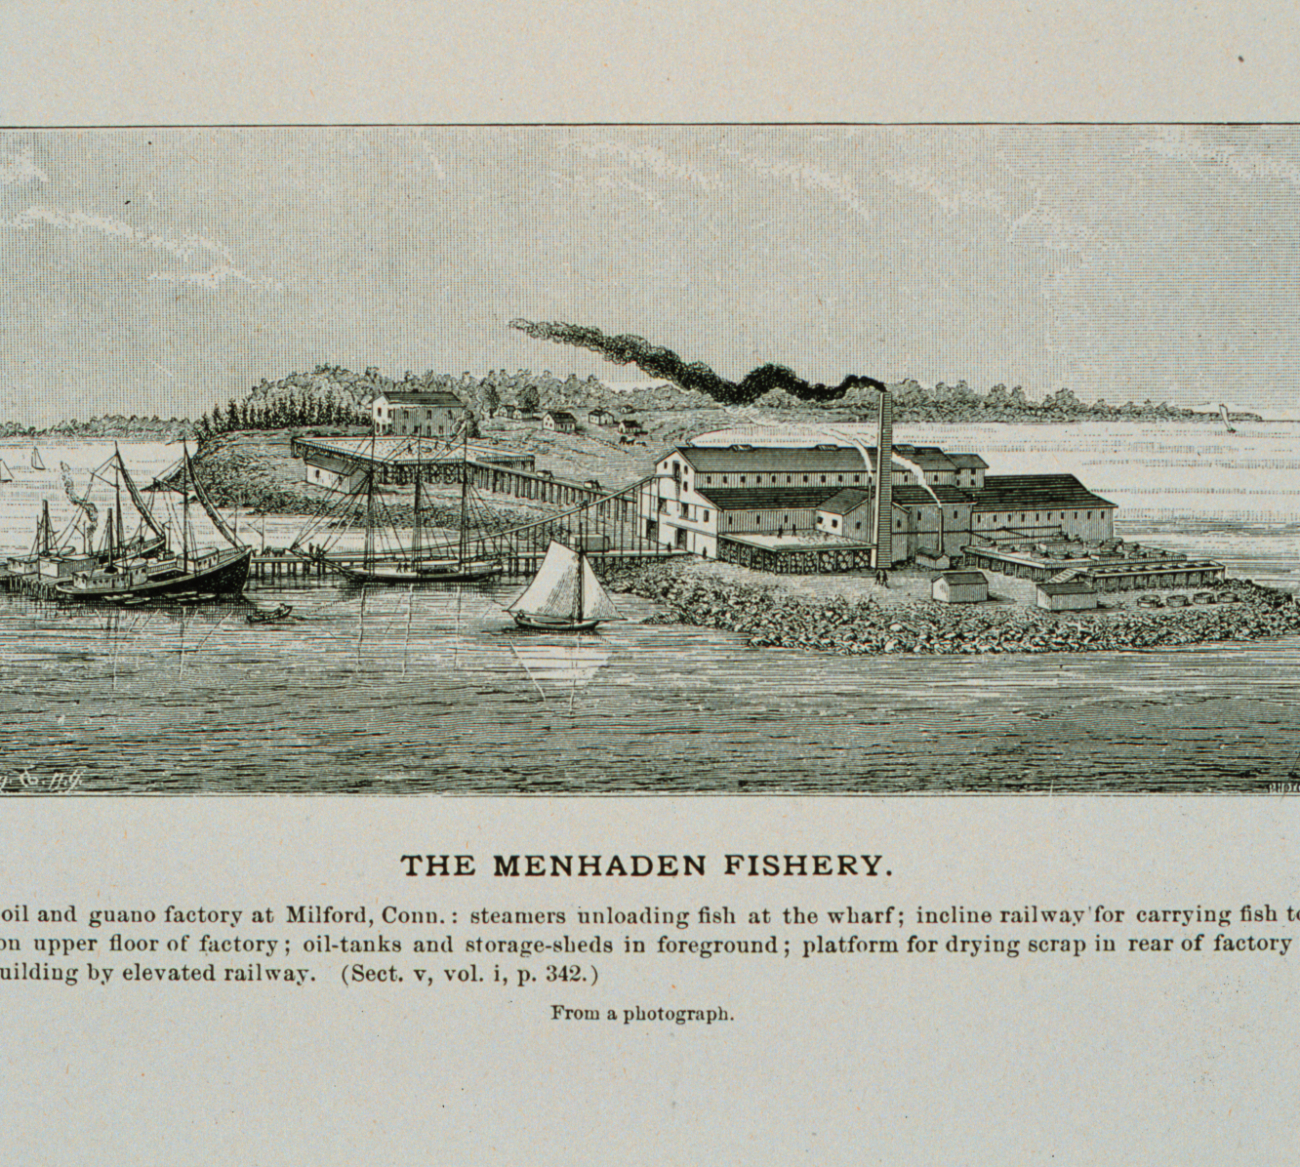 Menhaden oil and guano factory at Milford, Conn